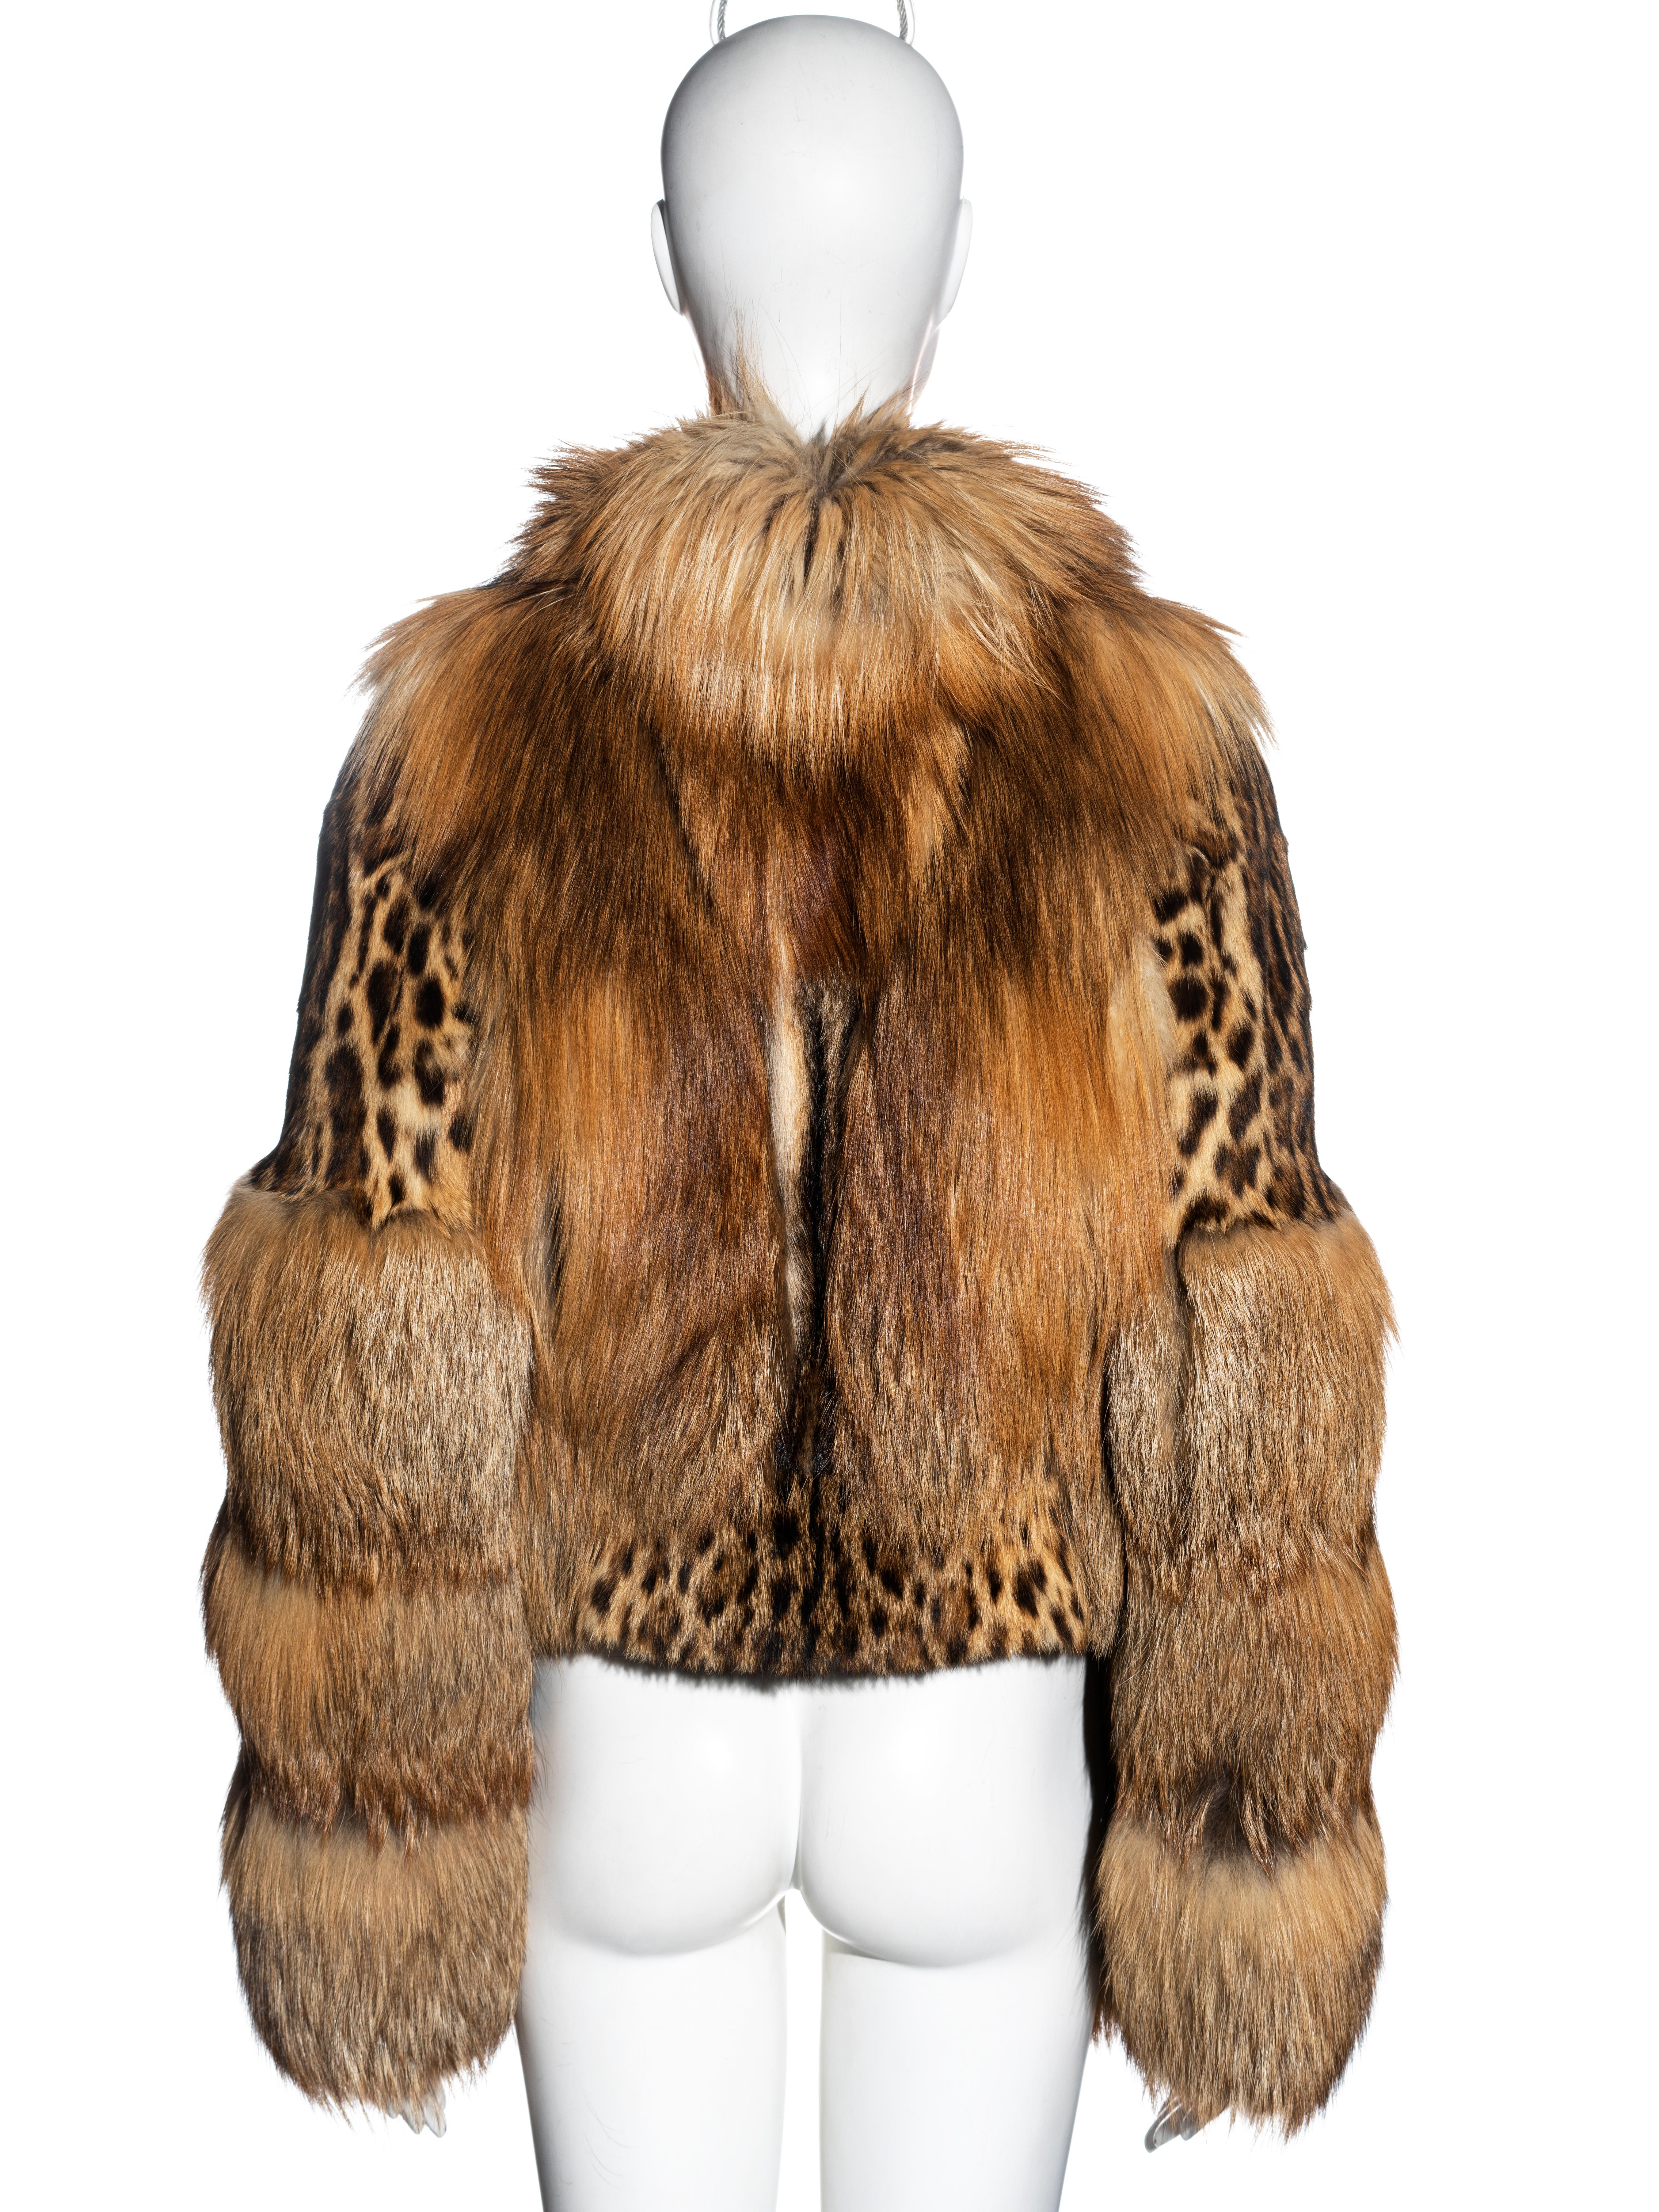 Women's Gucci by Tom Ford fur jacket, fw 1999